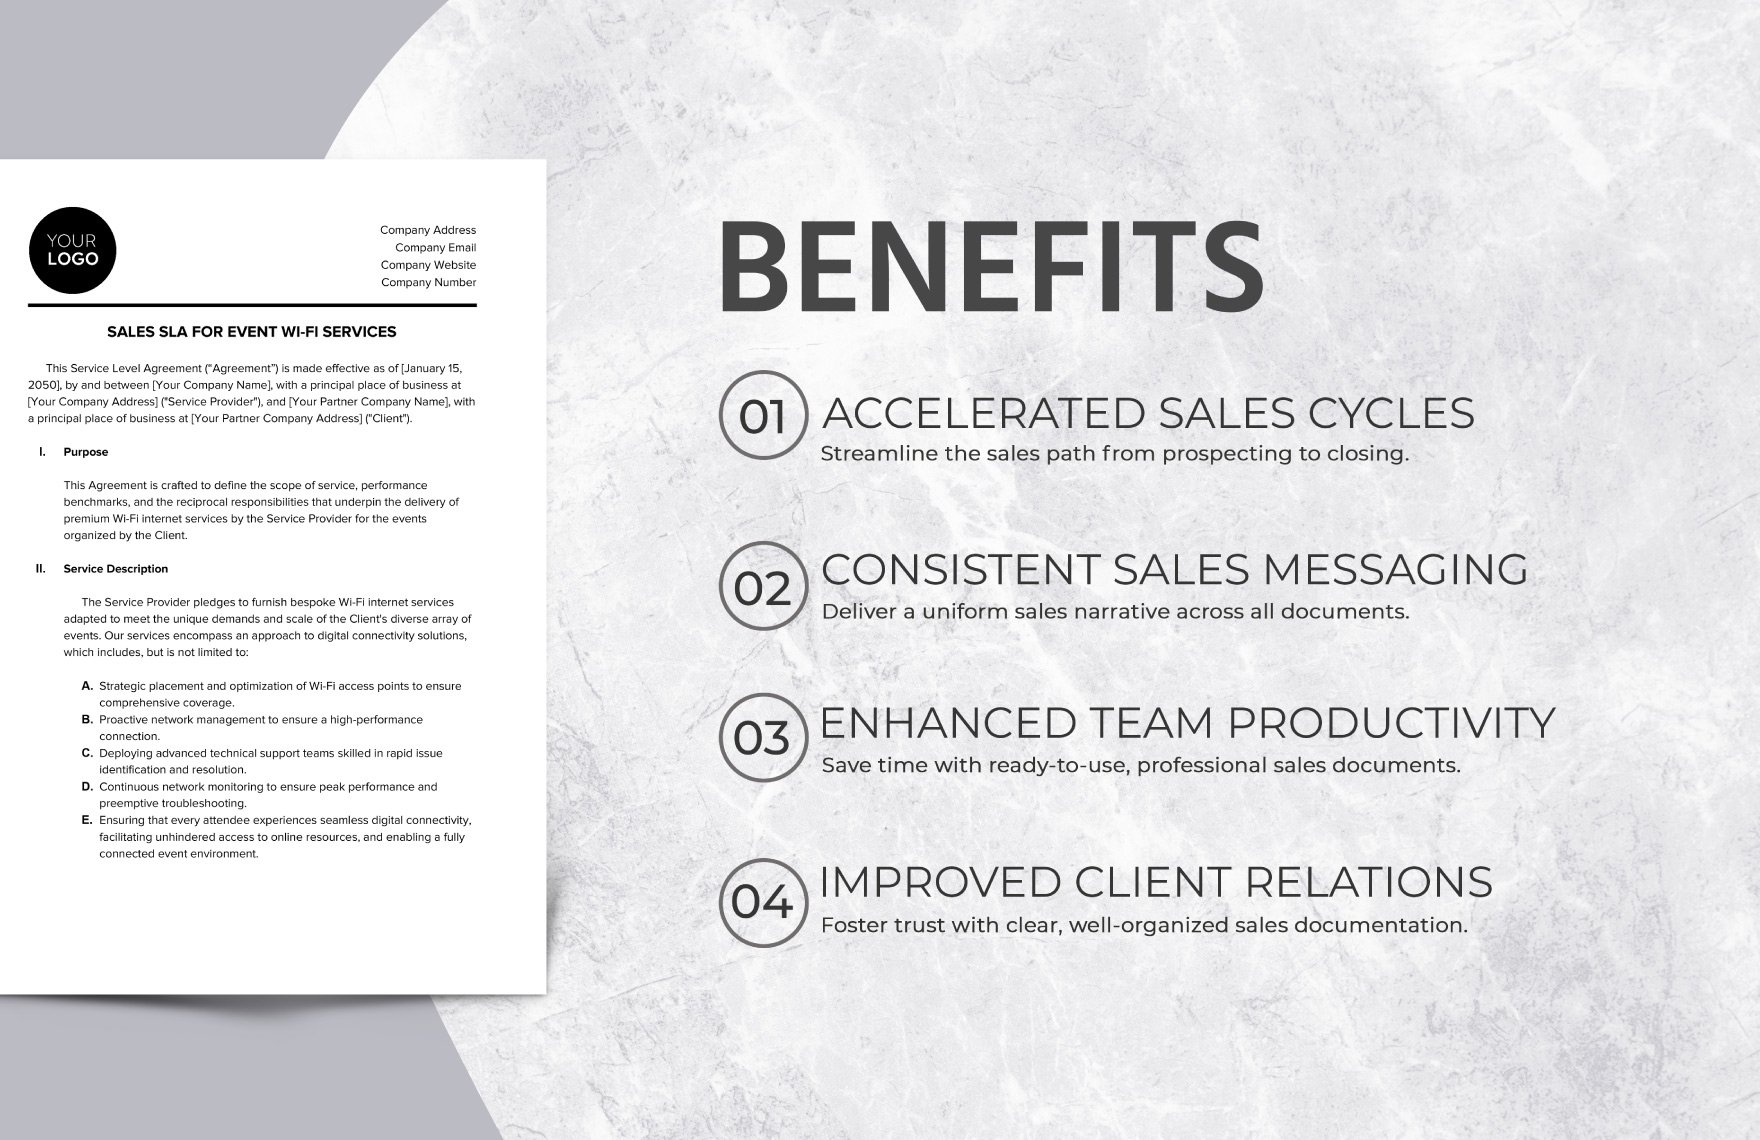 Sales SLA for Event Wi-Fi Services Template